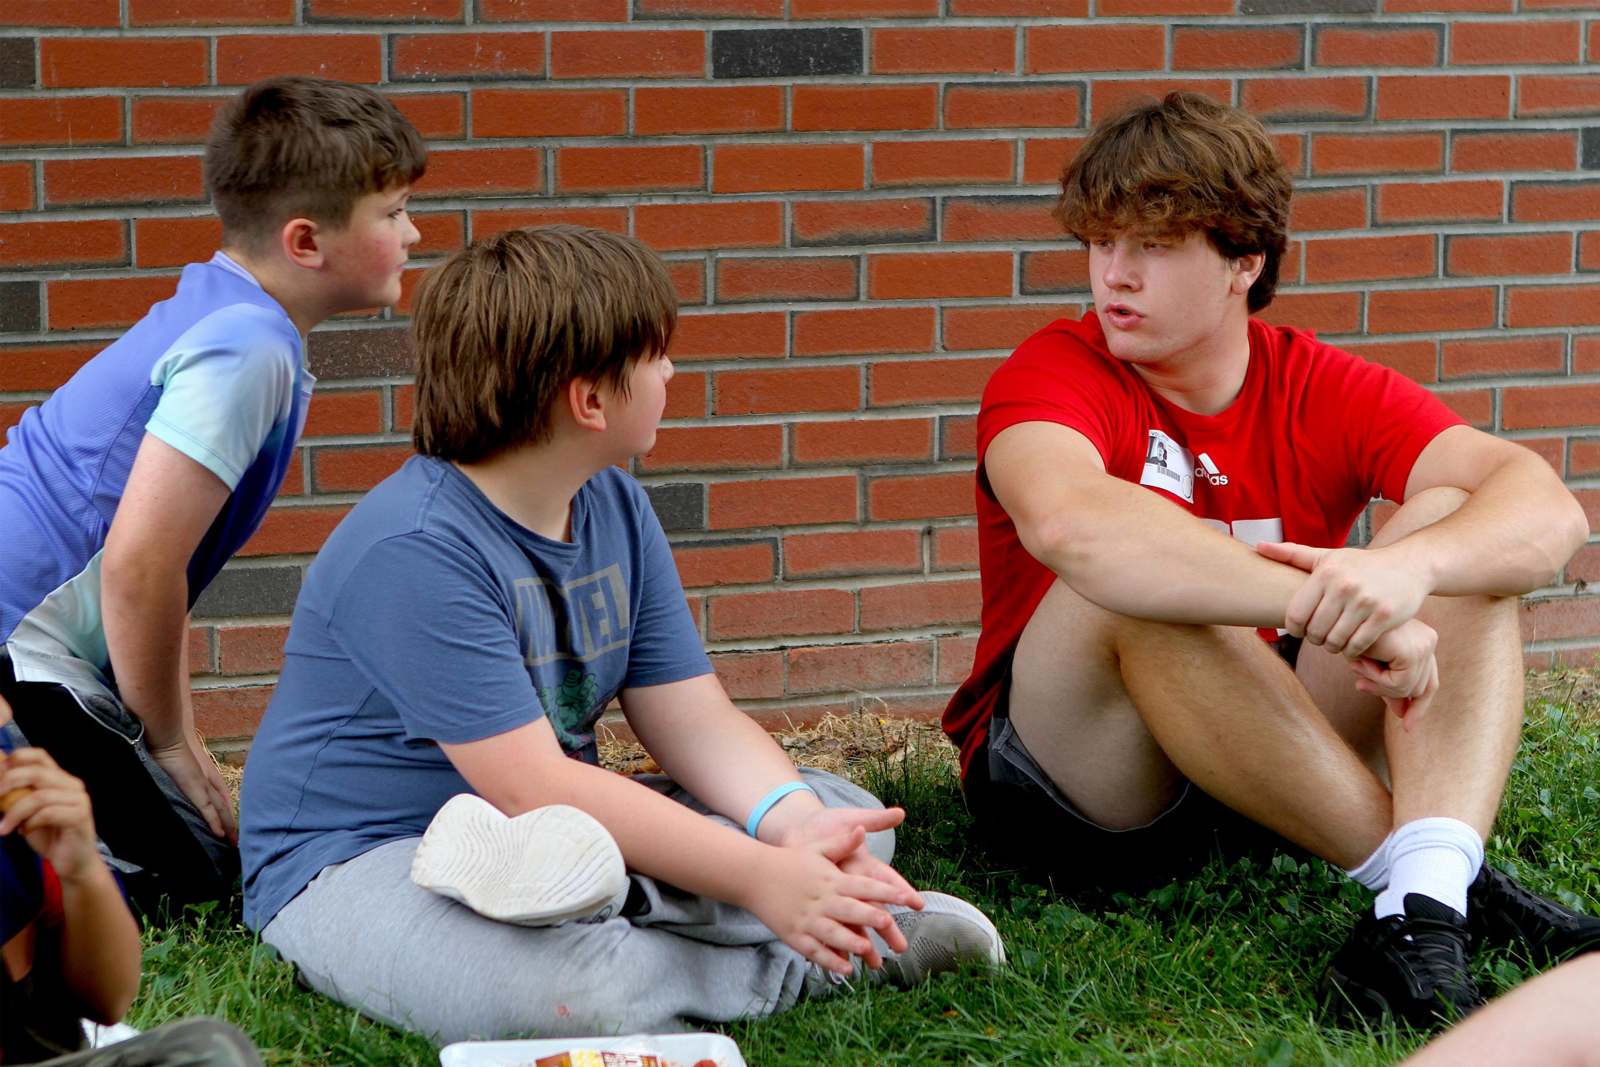 a group of boys sitting on grass